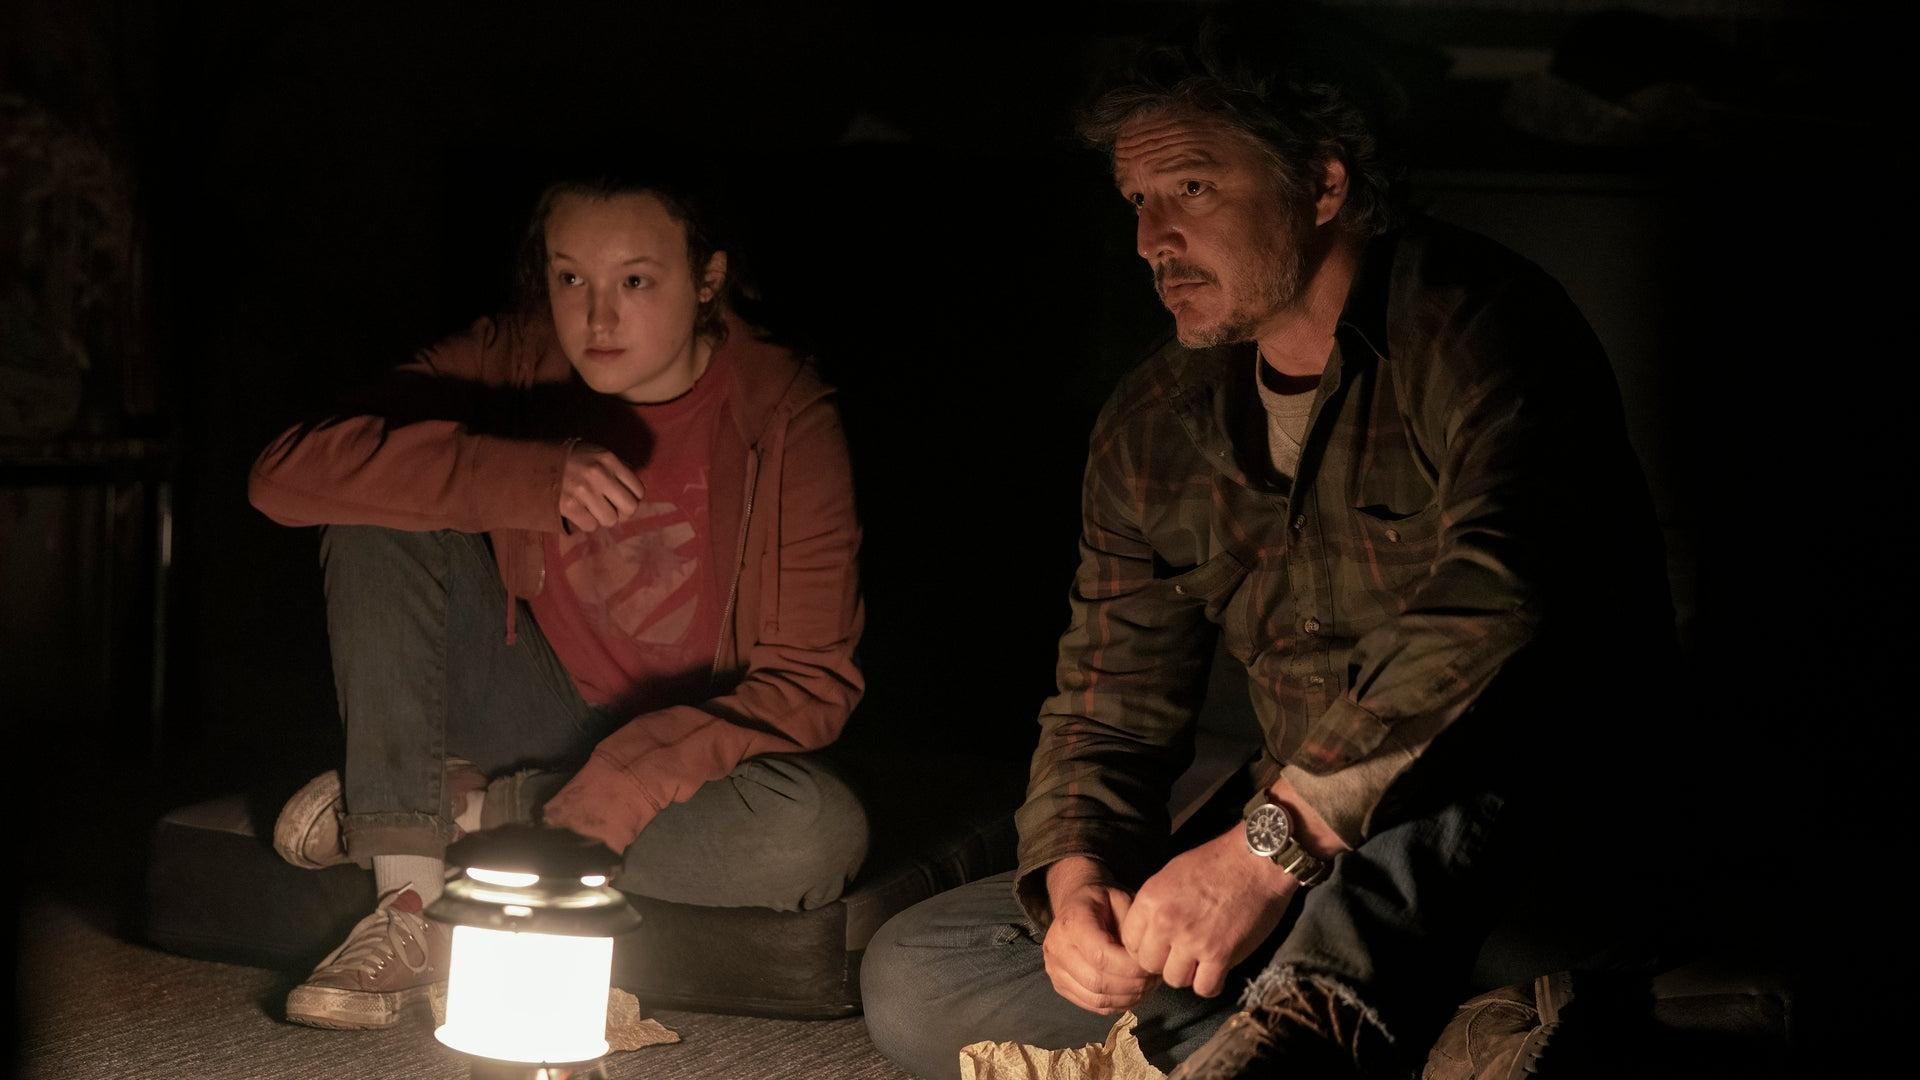 Joel and Ellie are unsure about trusting Sam and Henry. (Image: HBO)